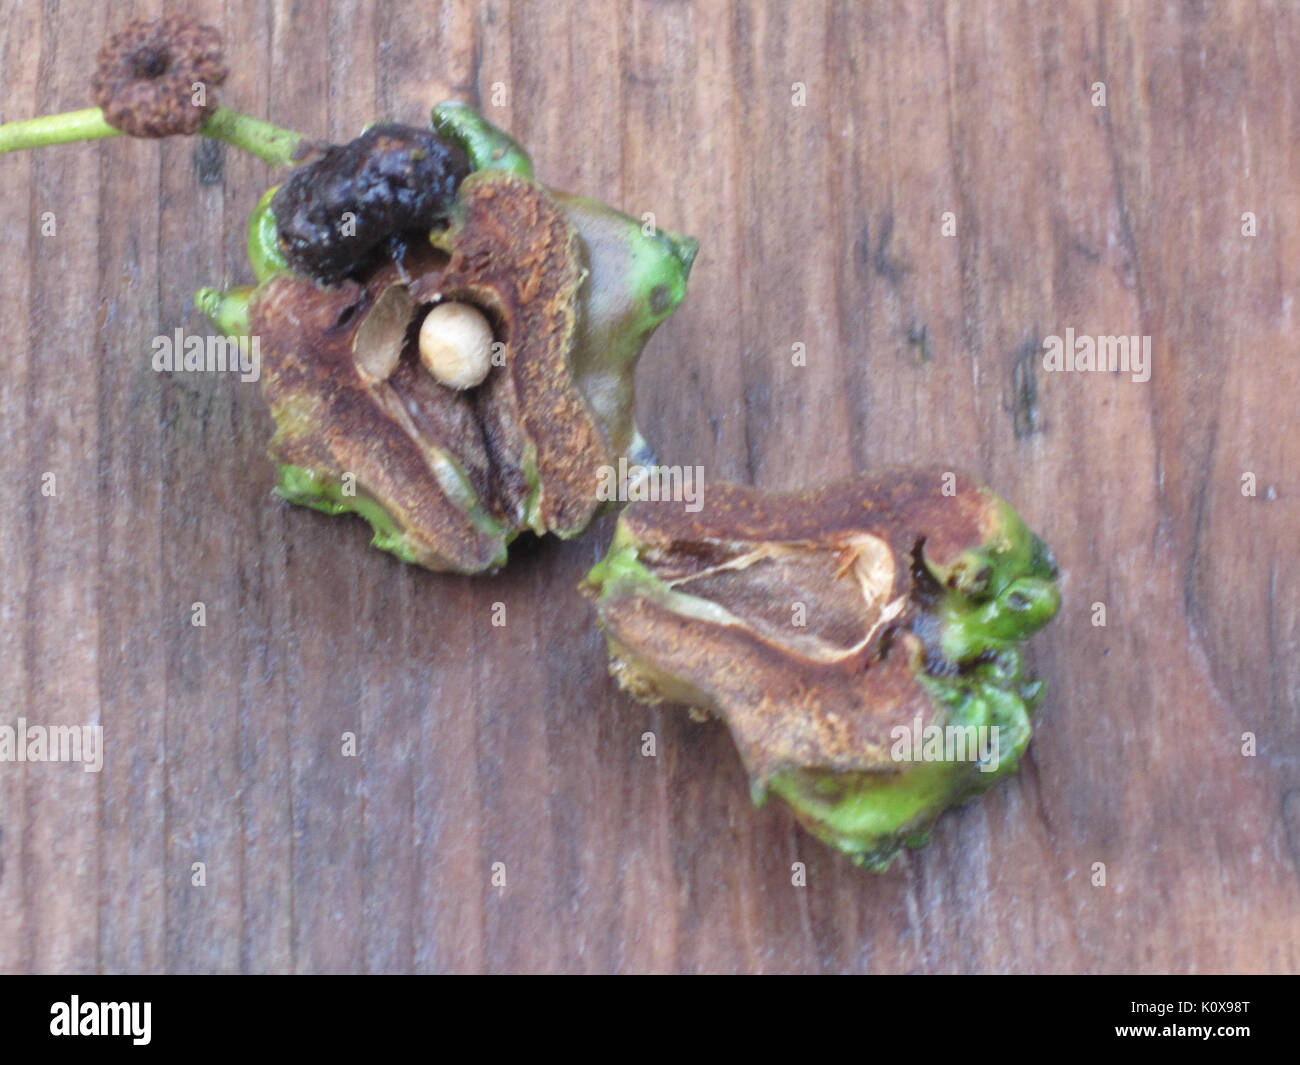 Andricus quercuscalicis (gall wasp) larva inside Knopper gall, Arnhem, the Netherlands Stock Photo